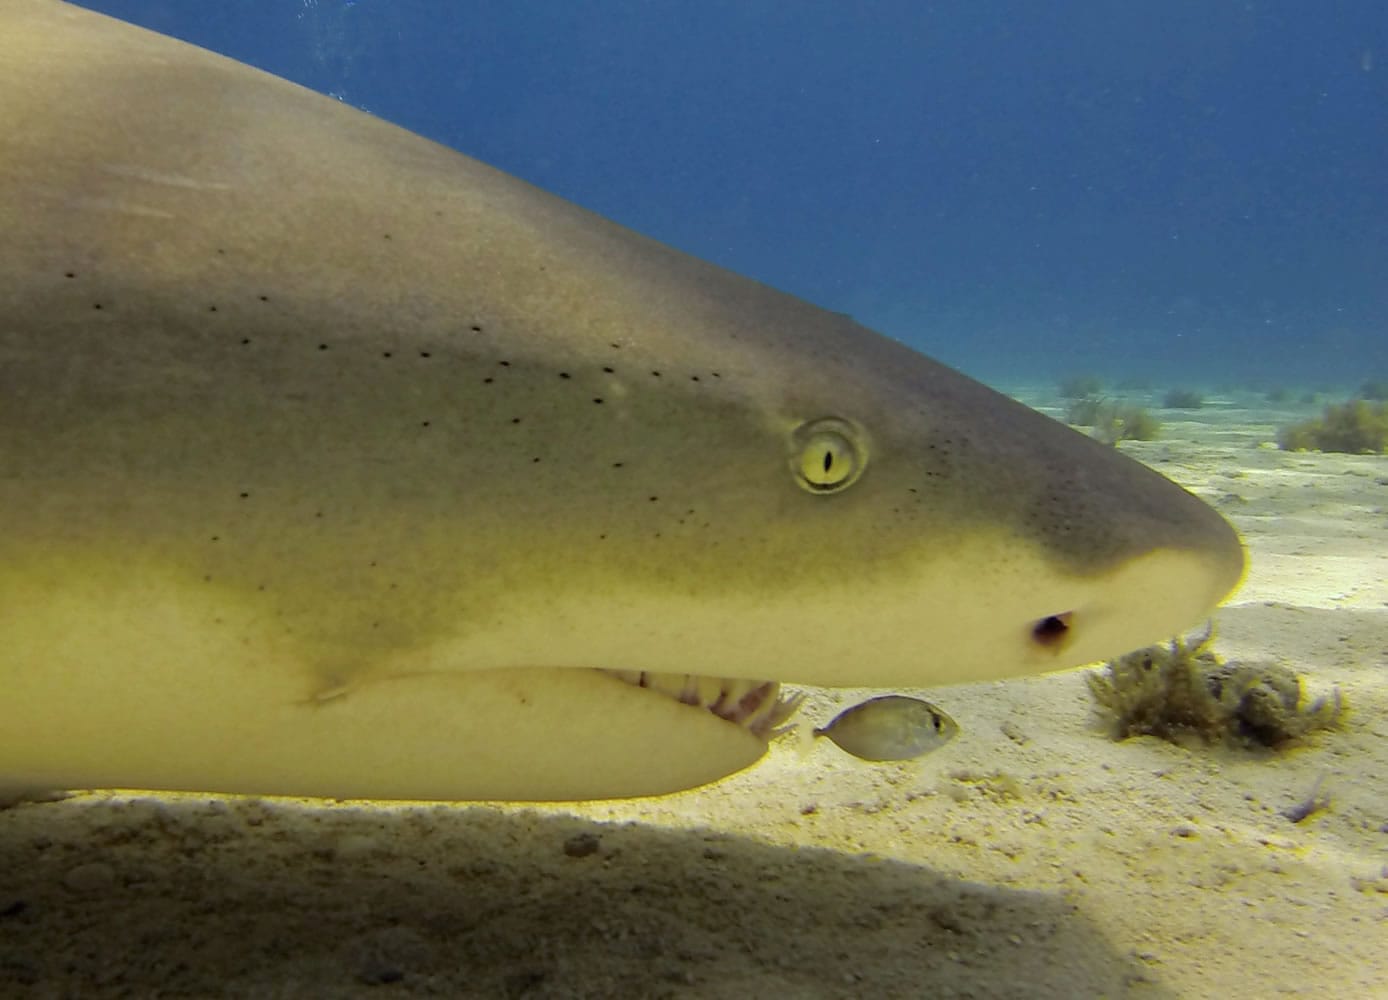 A tiny pilot fish stays close to a large lemon shark to catch table scraps.